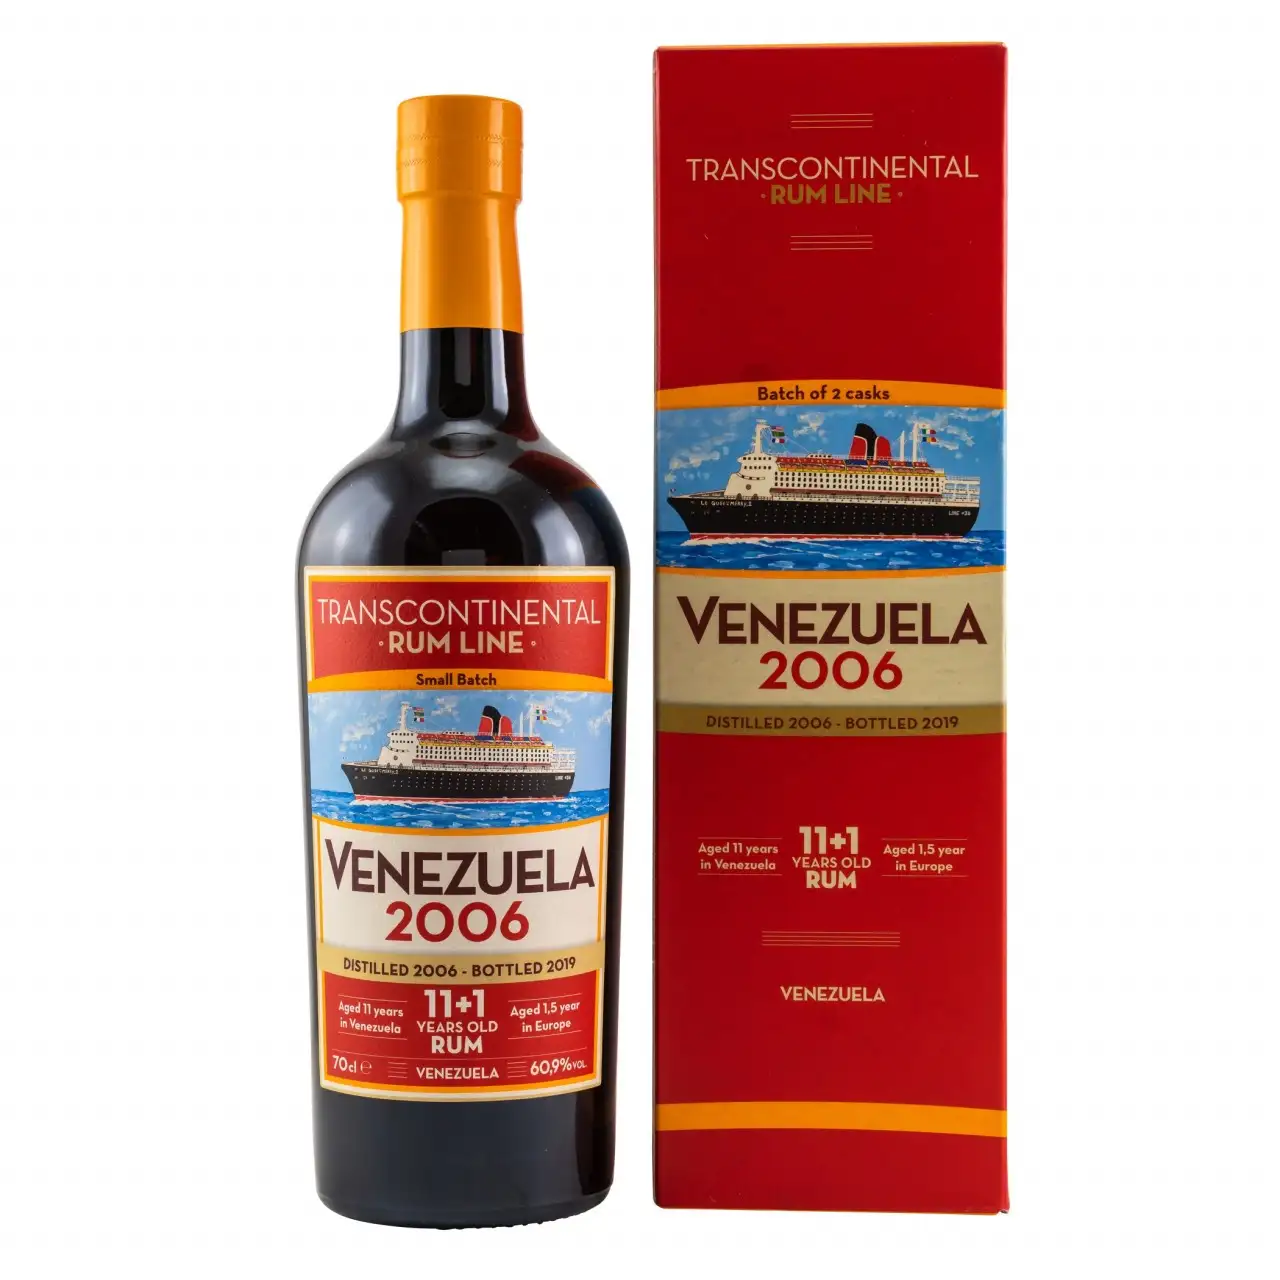 Image of the front of the bottle of the rum Venezuela 11+1